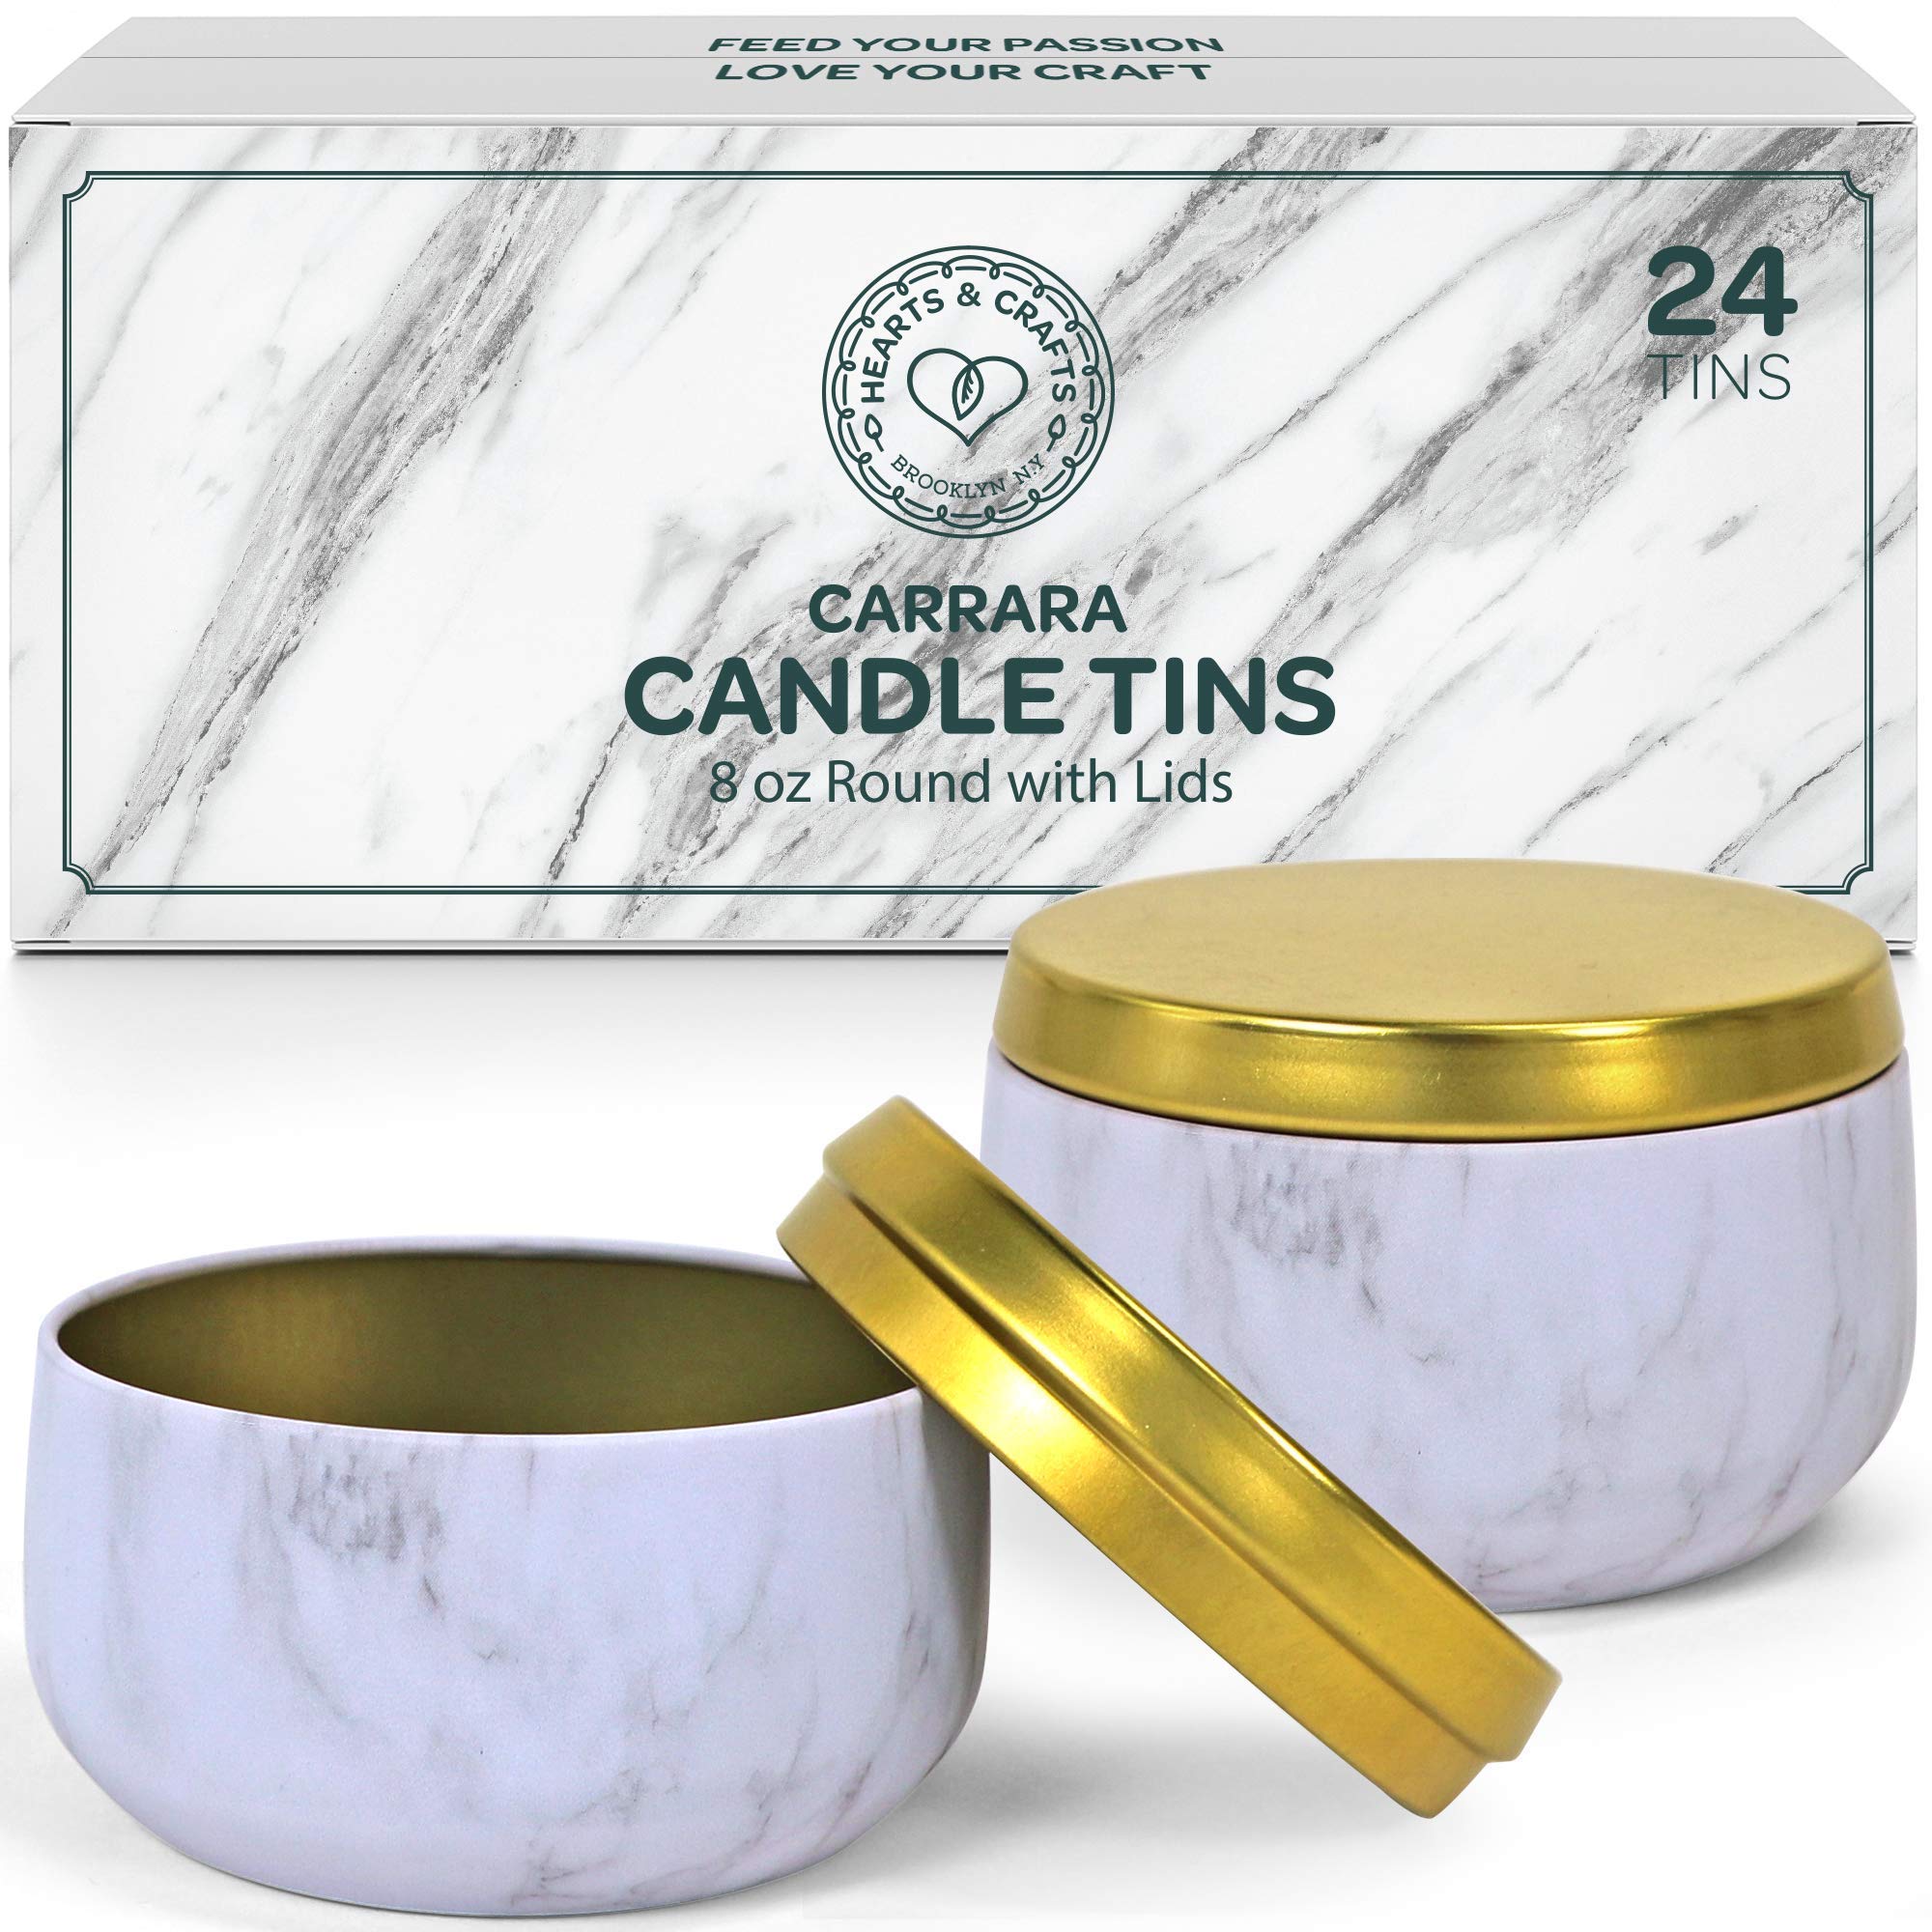 Hearts & Crafts Marble Candle Tins 8 oz with Lids - 24-Pack of Bulk Candle Jars for Making Candles, Arts & Crafts, Storage, Gifts, and More - Empty Candle Jars with Lids  - Like New